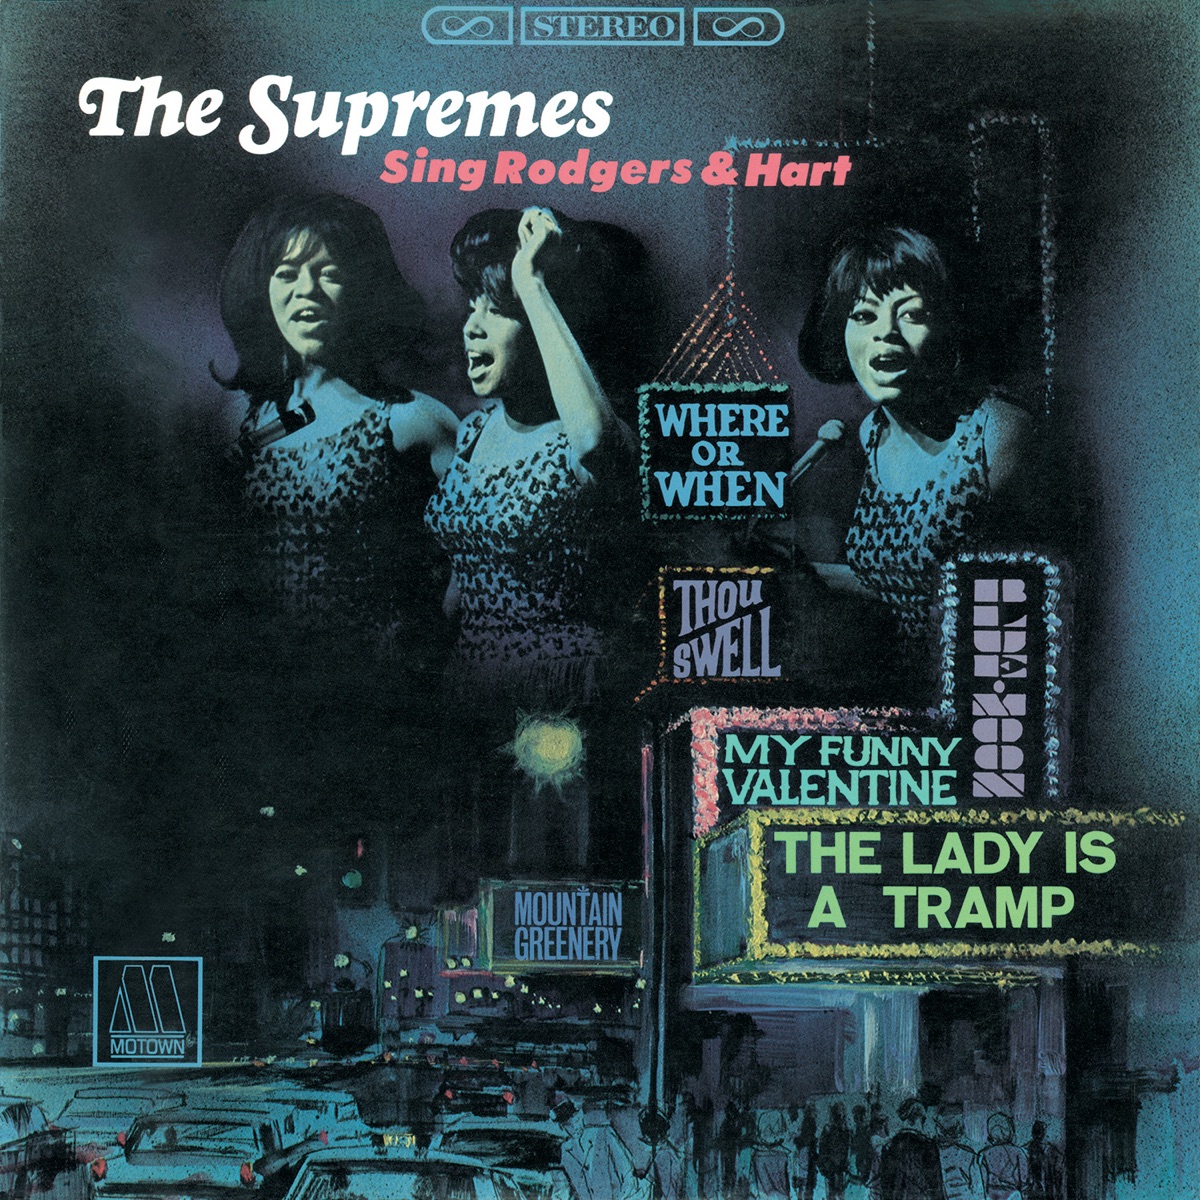 More Hits by The Supremes (Expanded Edition) - Album by The 